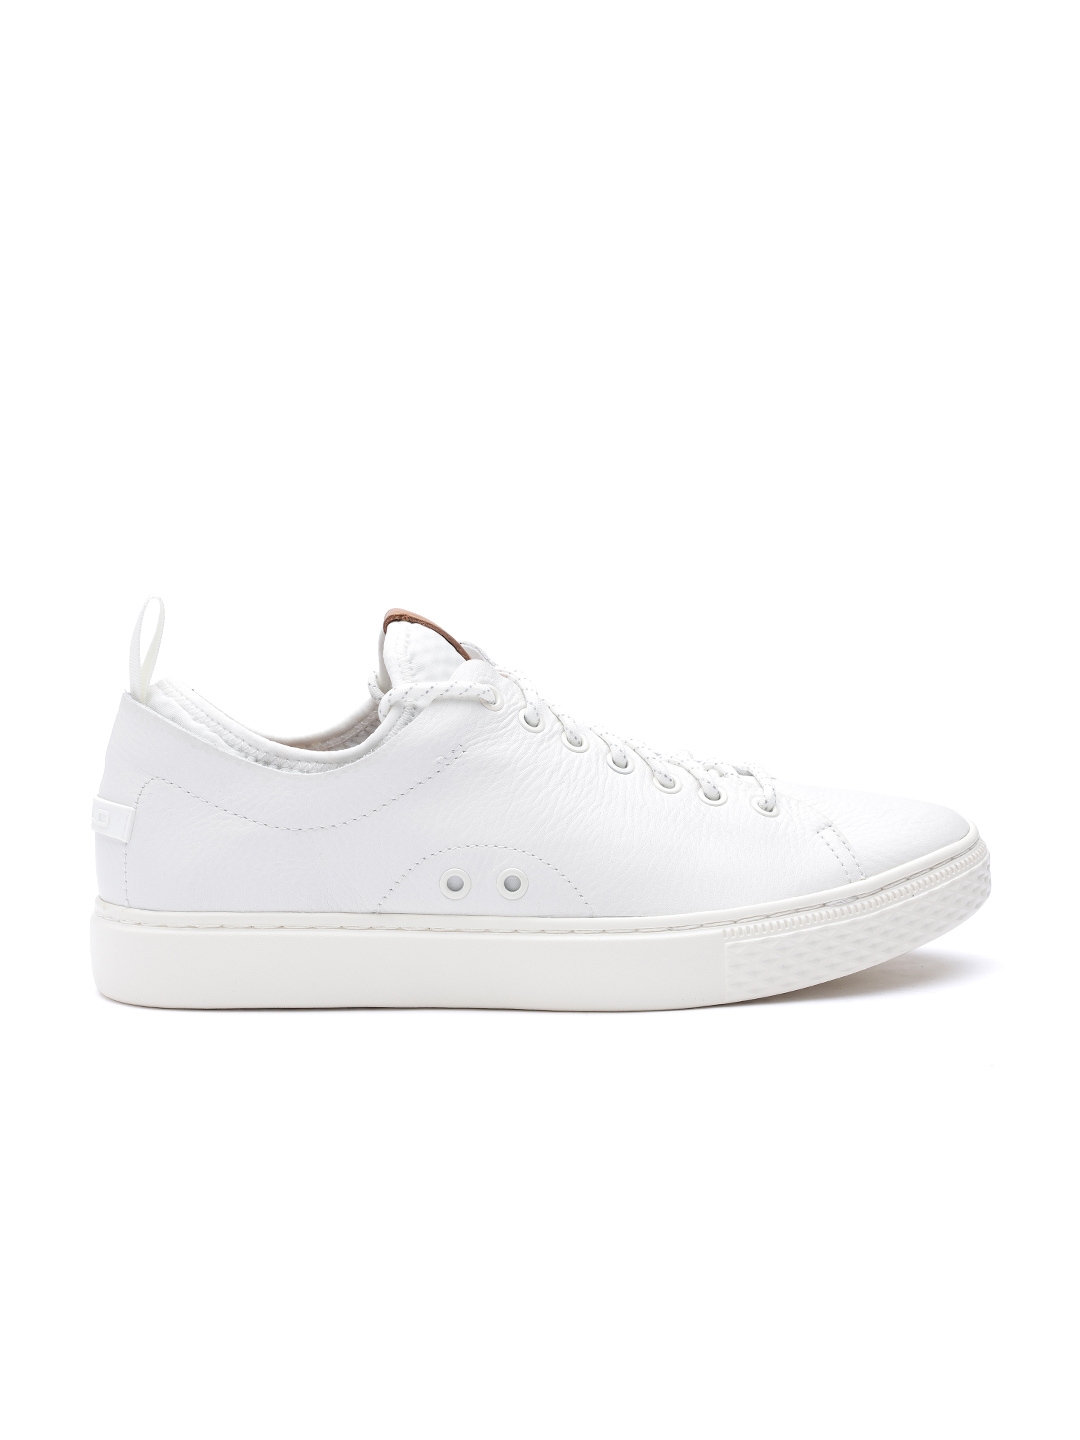 Buy Polo Ralph Lauren Dunovin Leather Sneaker - Casual Shoes for Men  7481437 | Myntra